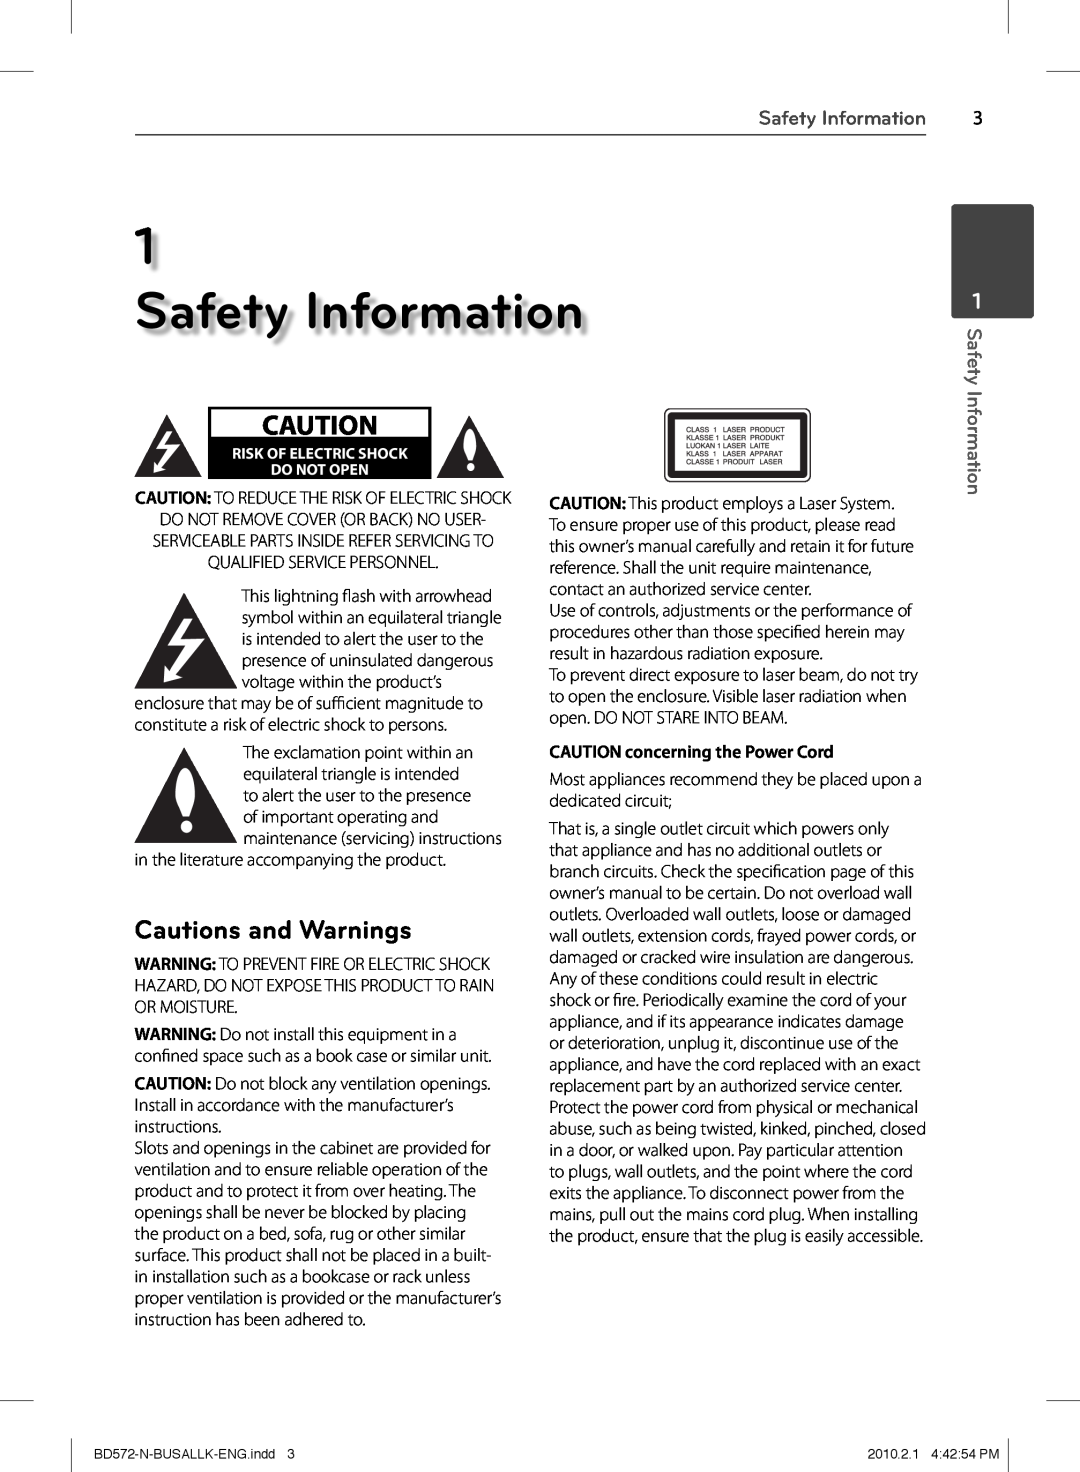 LG Electronics BD570 owner manual Cautions and Warnings, Safety Information, CAUTION concerning the Power Cord 